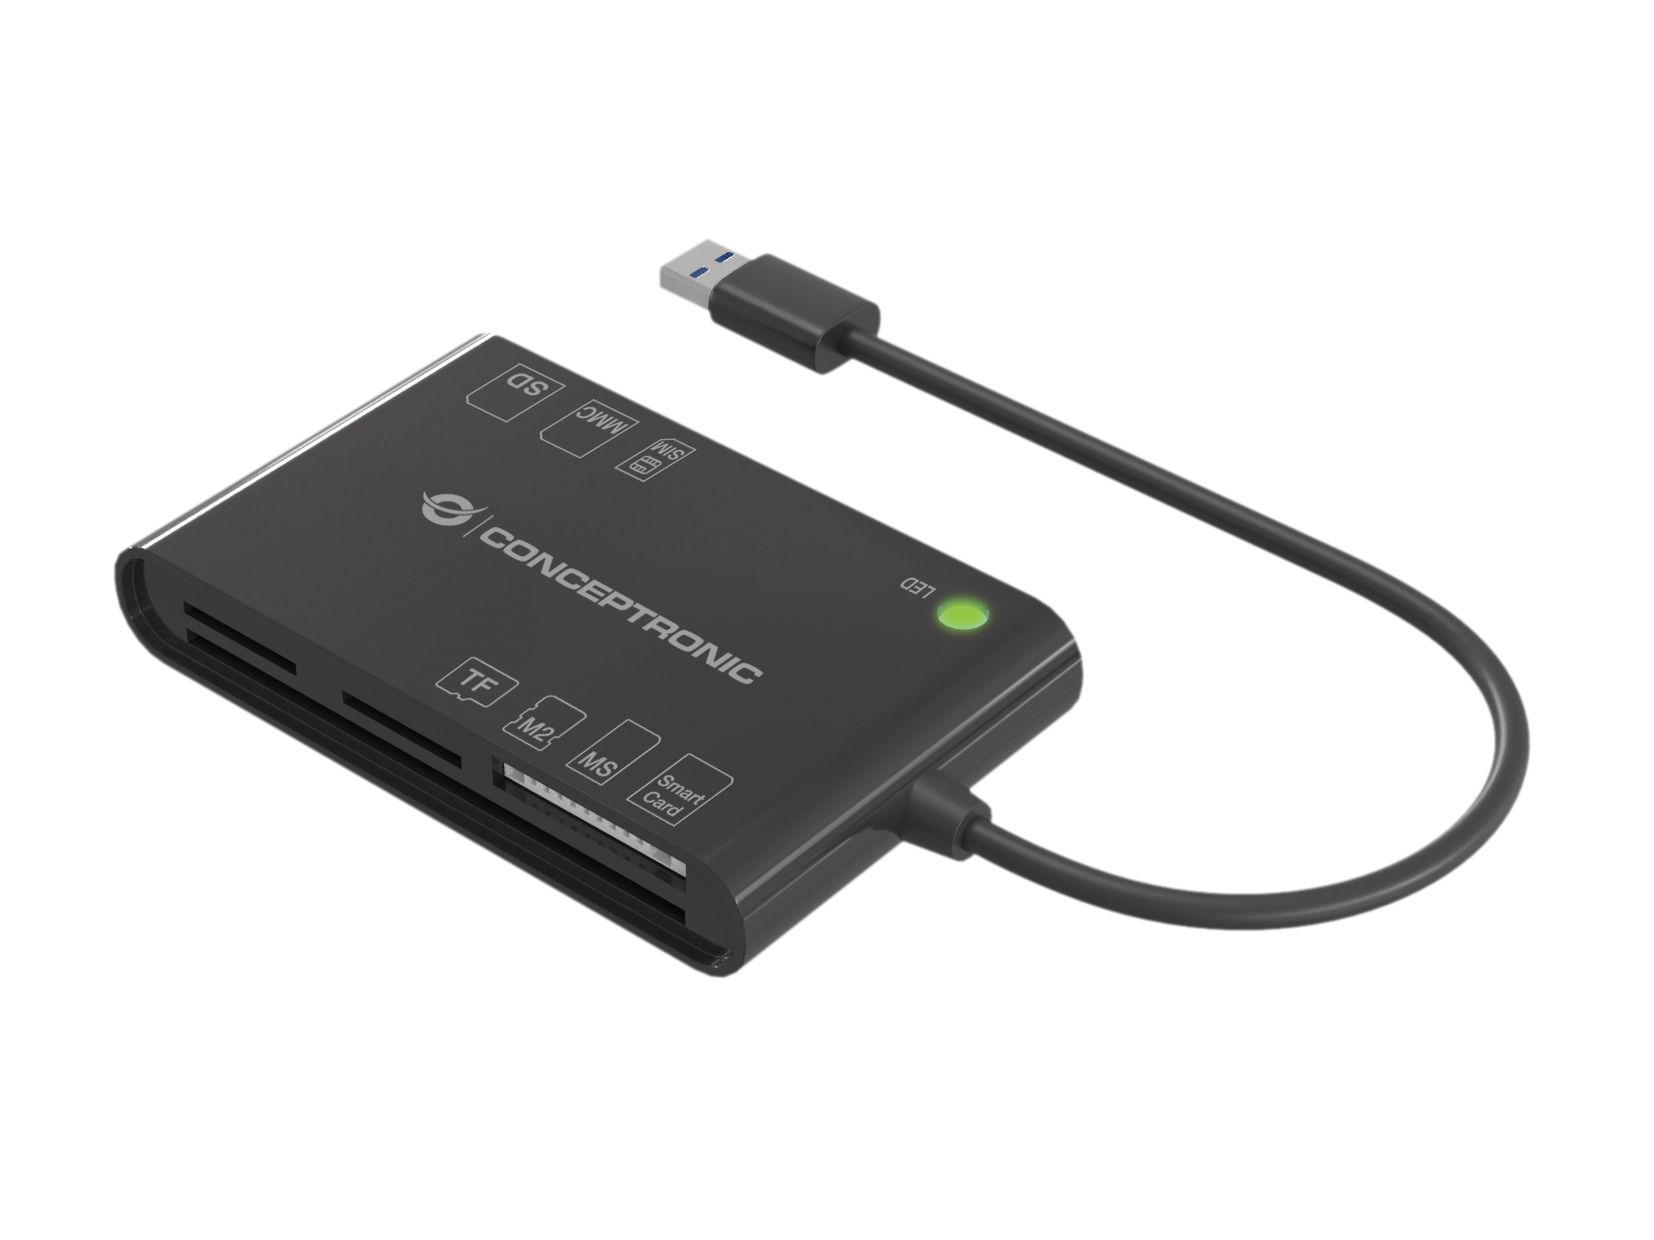 CONCEPTRONIC Smart ID Card Reader All-In-One schwarz - BIAN01B